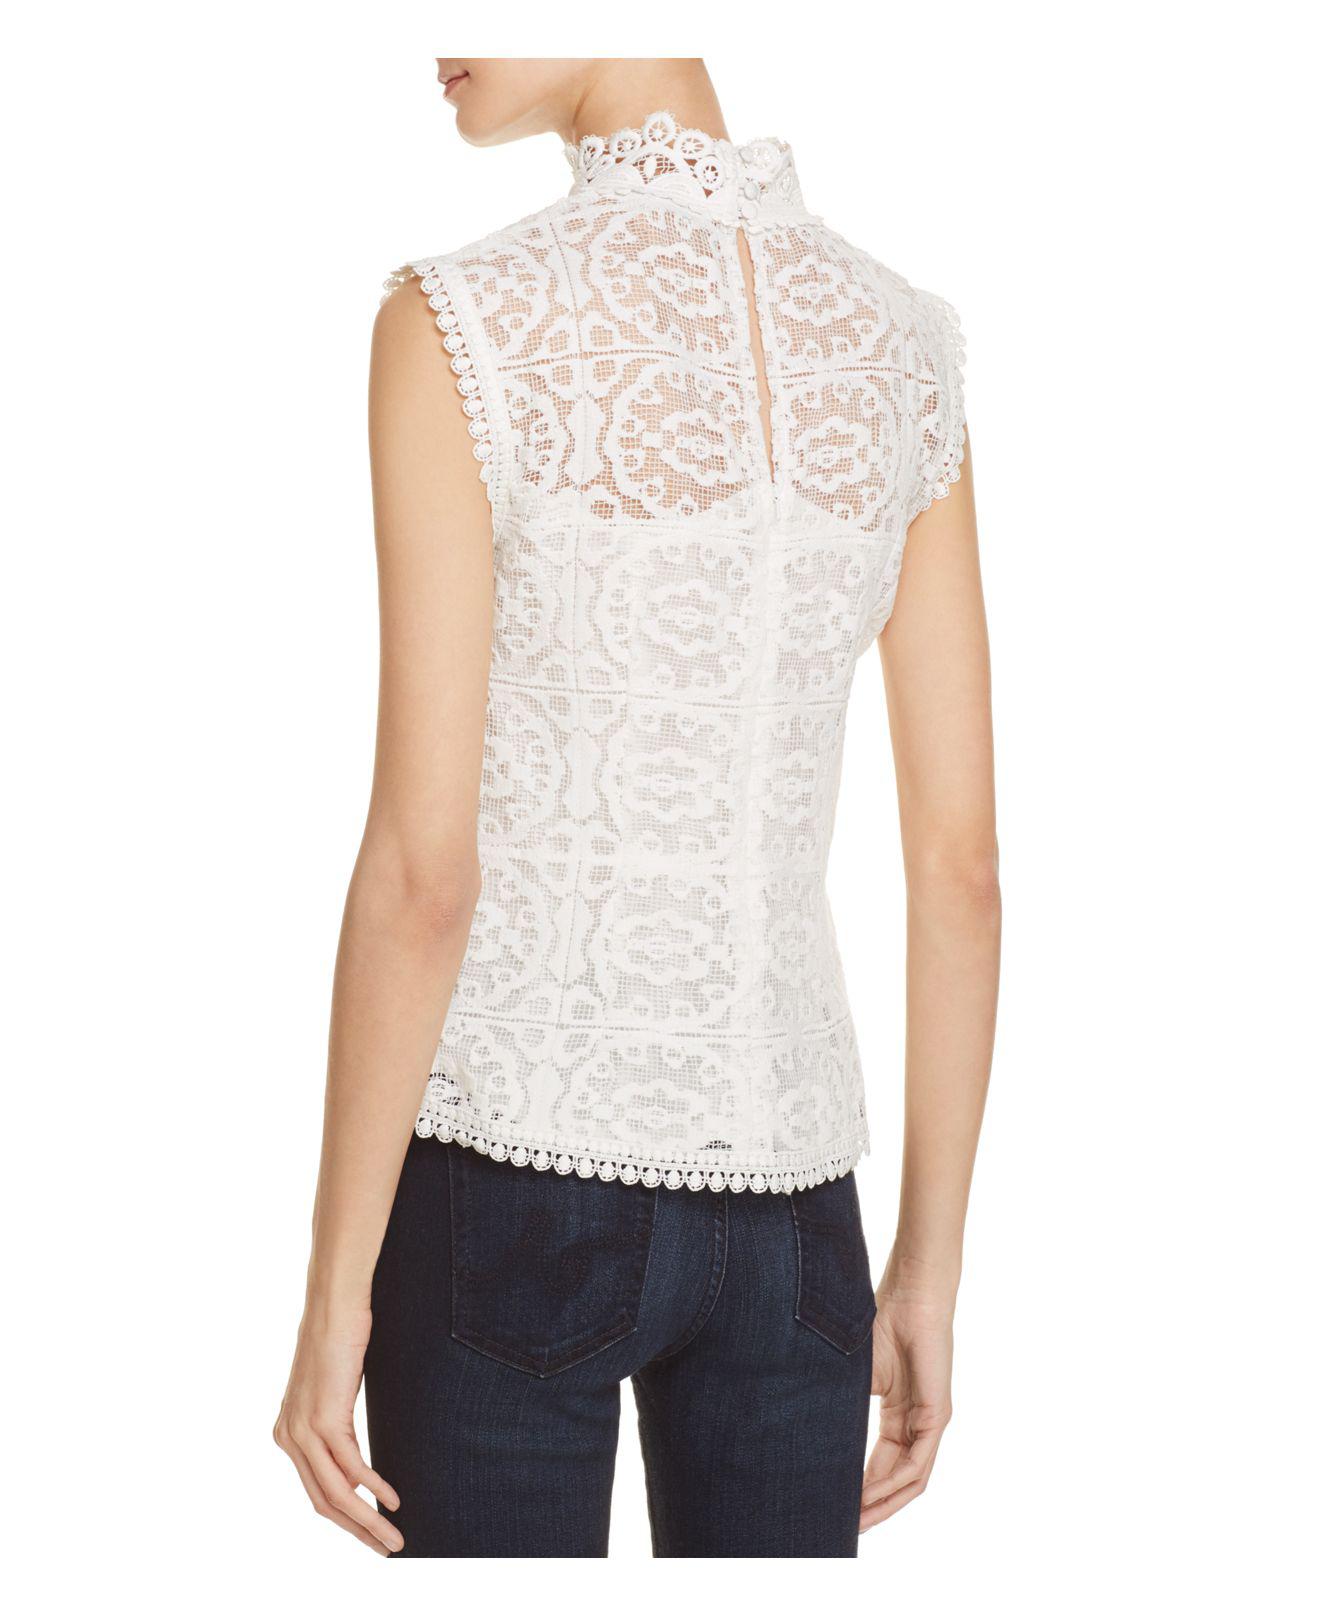 Aqua Lace Mock Neck Sleeveless Top in White - Lyst